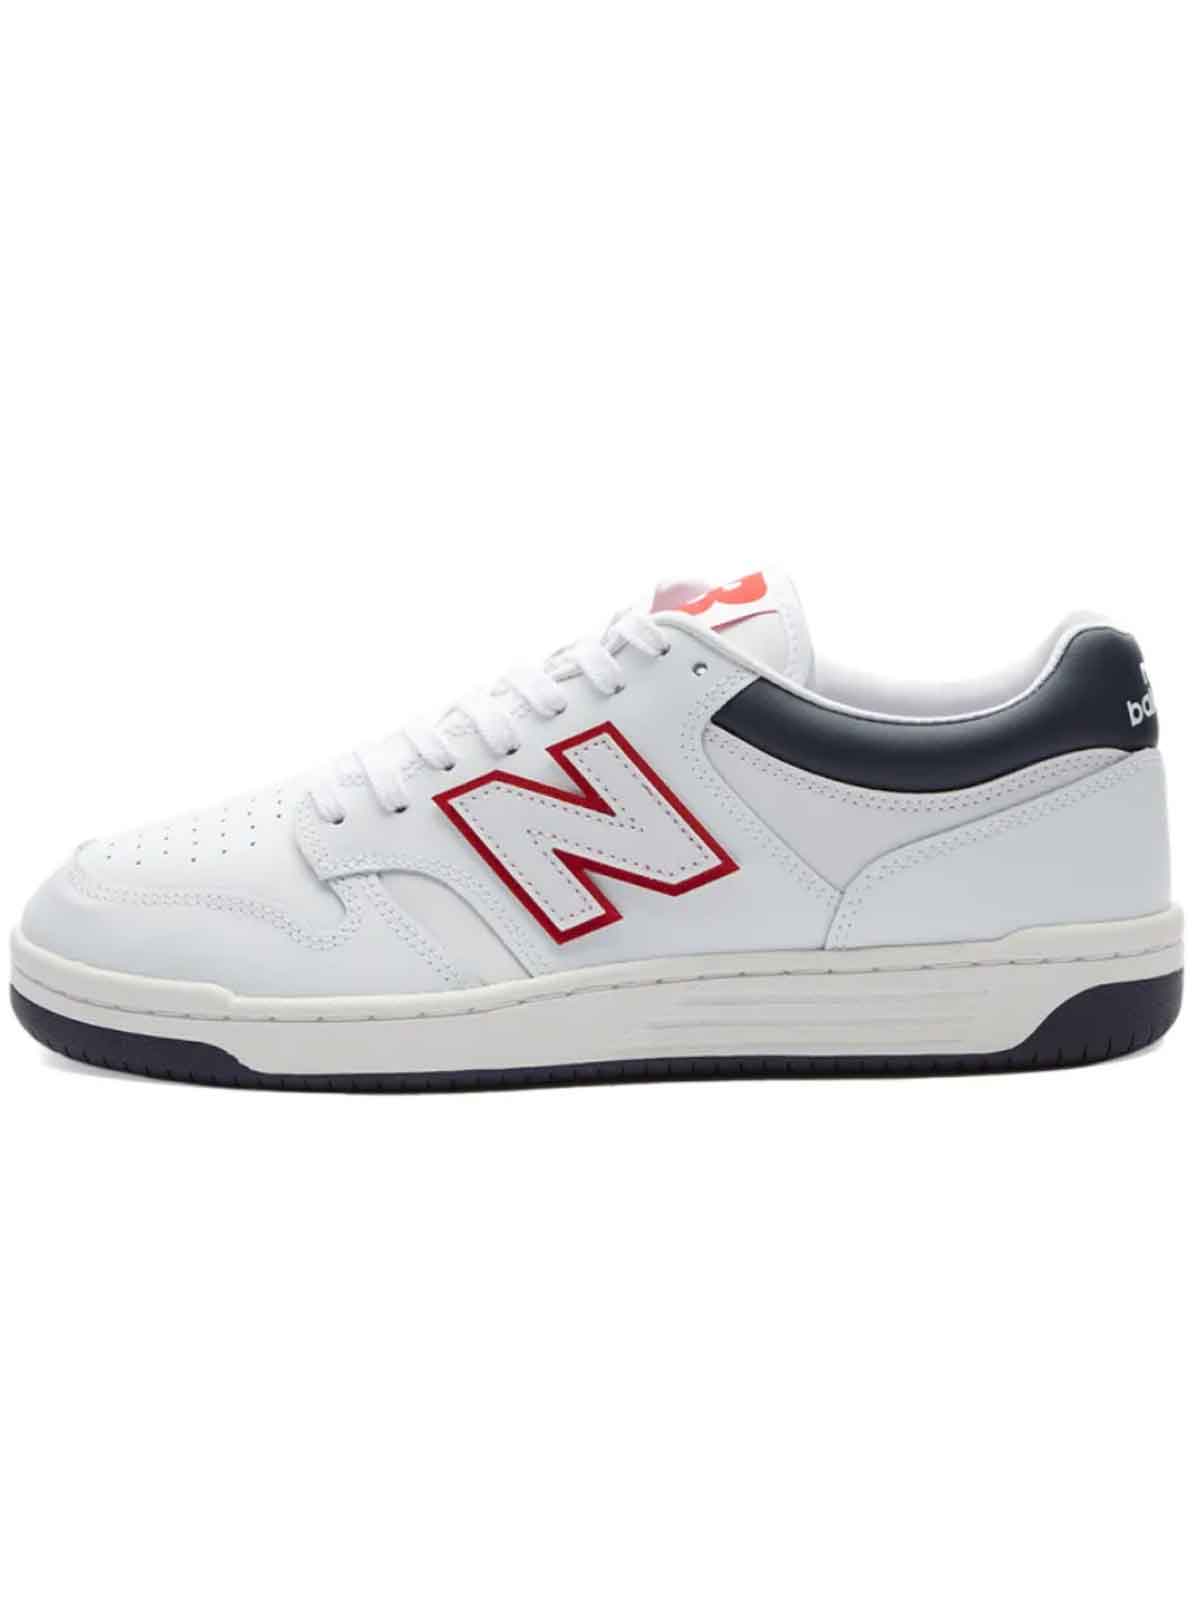   New Balance | 480 Navy Red White Sneakers |  